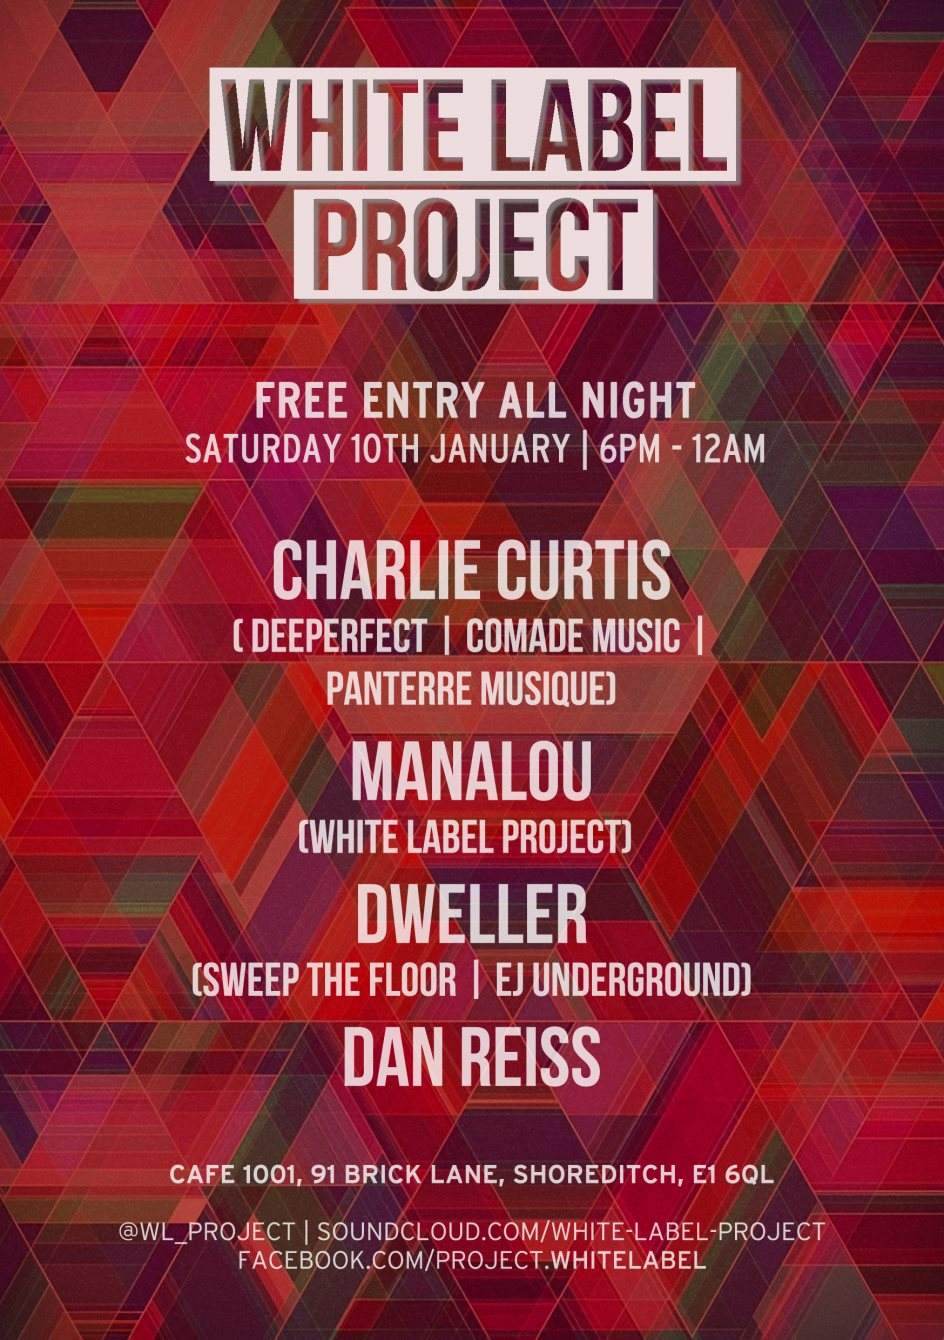 White Label Project Free Pre Party with Charlie Curtis [Deeperfect] & Dweller [Sweep The Floor] - フライヤー表